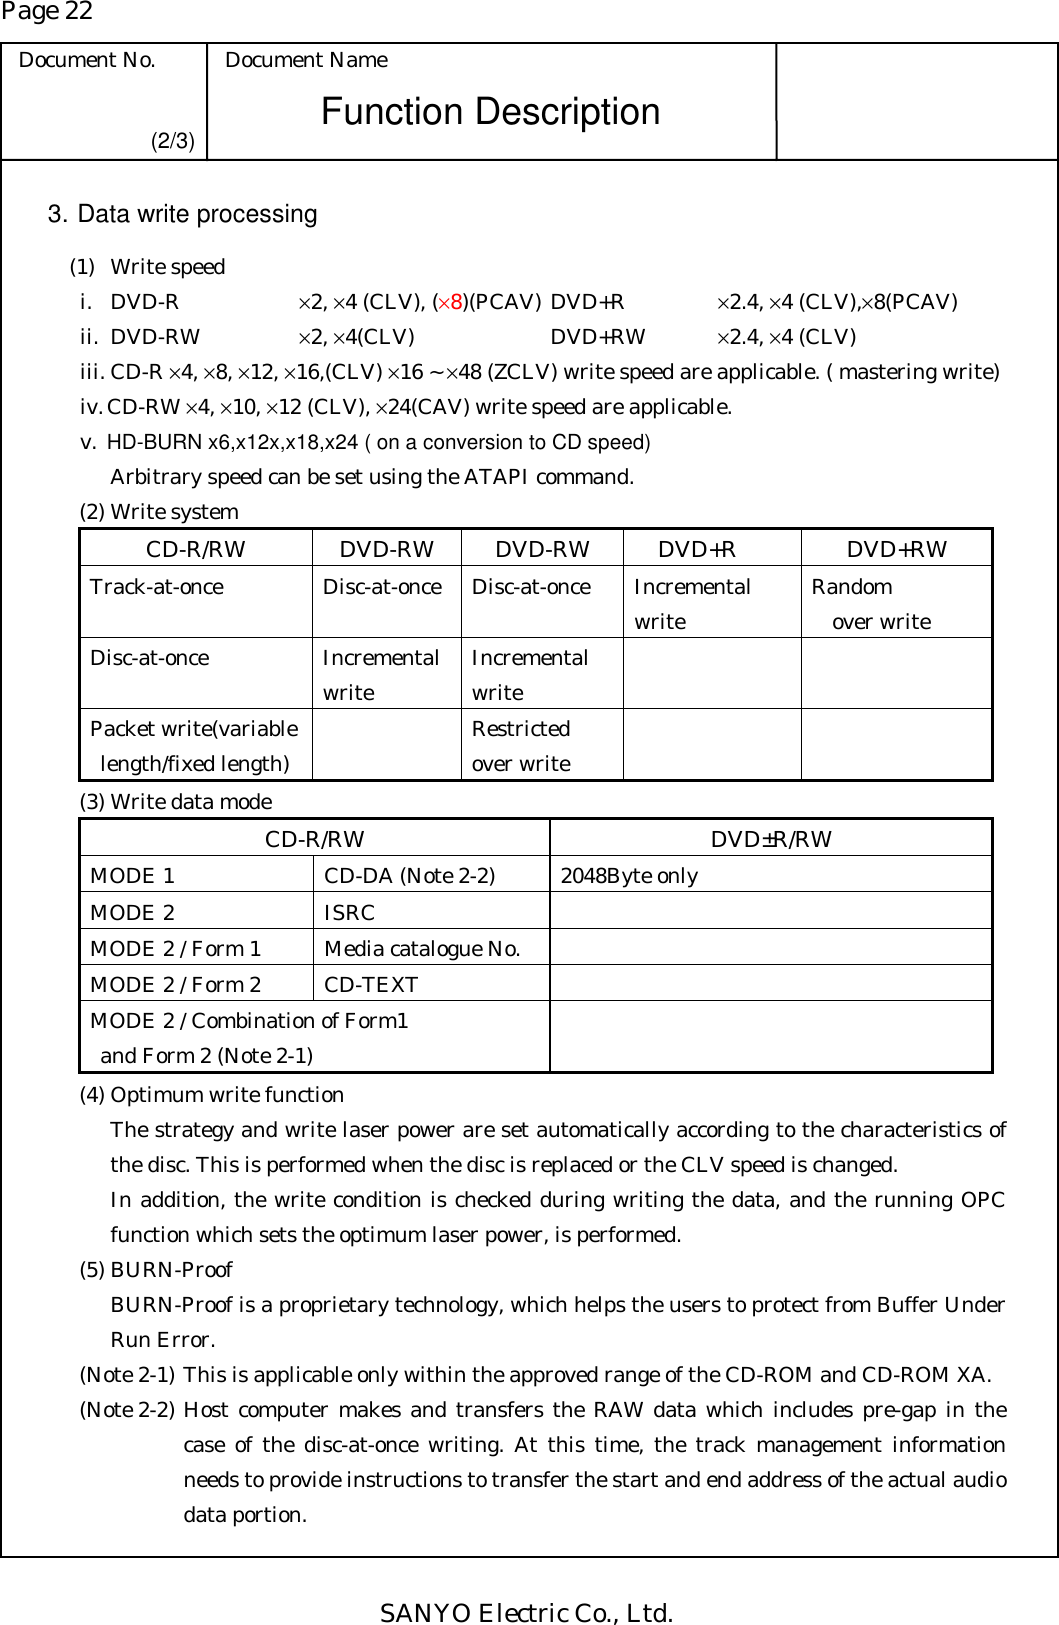 Page 22 Document No.  Document Name SANYO Electric Co., Ltd. Function Description (2/3) 3. Data write processing  (1) Write speed i. DVD-R    ×2, ×4 (CLV), (×8)(PCAV) DVD+R   ×2.4, ×4 (CLV),×8(PCAV) ii. DVD-RW   ×2, ×4(CLV)   DVD+RW  ×2.4, ×4 (CLV) iii. CD-R ×4, ×8, ×12, ×16,(CLV) ×16 ~ ×48 (ZCLV) write speed are applicable. ( mastering write) iv. CD-RW ×4, ×10, ×12 (CLV), ×24(CAV) write speed are applicable. v. HD-BURN x6,x12x,x18,x24 ( on a conversion to CD speed)     Arbitrary speed can be set using the ATAPI command.   (2) Write system CD-R/RW DVD-RW DVD-RW DVD+R  DVD+RW Track-at-once Disc-at-once Disc-at-once Incremental write  Random over write Disc-at-once Incremental write  Incremental write    Packet write(variable length/fixed length)   Restricted over write      (3) Write data mode CD-R/RW DVD±R/RW MODE 1  CD-DA (Note 2-2)  2048Byte only MODE 2  ISRC   MODE 2 / Form 1  Media catalogue No.   MODE 2 / Form 2  CD-TEXT   MODE 2 / Combination of Form1   and Form 2 (Note 2-1)     (4) Optimum write function The strategy and write laser power are set automatically according to the characteristics of the disc. This is performed when the disc is replaced or the CLV speed is changed. In addition, the write condition is checked during writing the data, and the running OPC function which sets the optimum laser power, is performed.    (5) BURN-Proof BURN-Proof is a proprietary technology, which helps the users to protect from Buffer Under Run Error.   (Note 2-1) This is applicable only within the approved range of the CD-ROM and CD-ROM XA. (Note 2-2) Host computer makes and transfers the RAW data which includes pre-gap in the case of the disc-at-once writing. At this time, the track management information needs to provide instructions to transfer the start and end address of the actual audio data portion. 